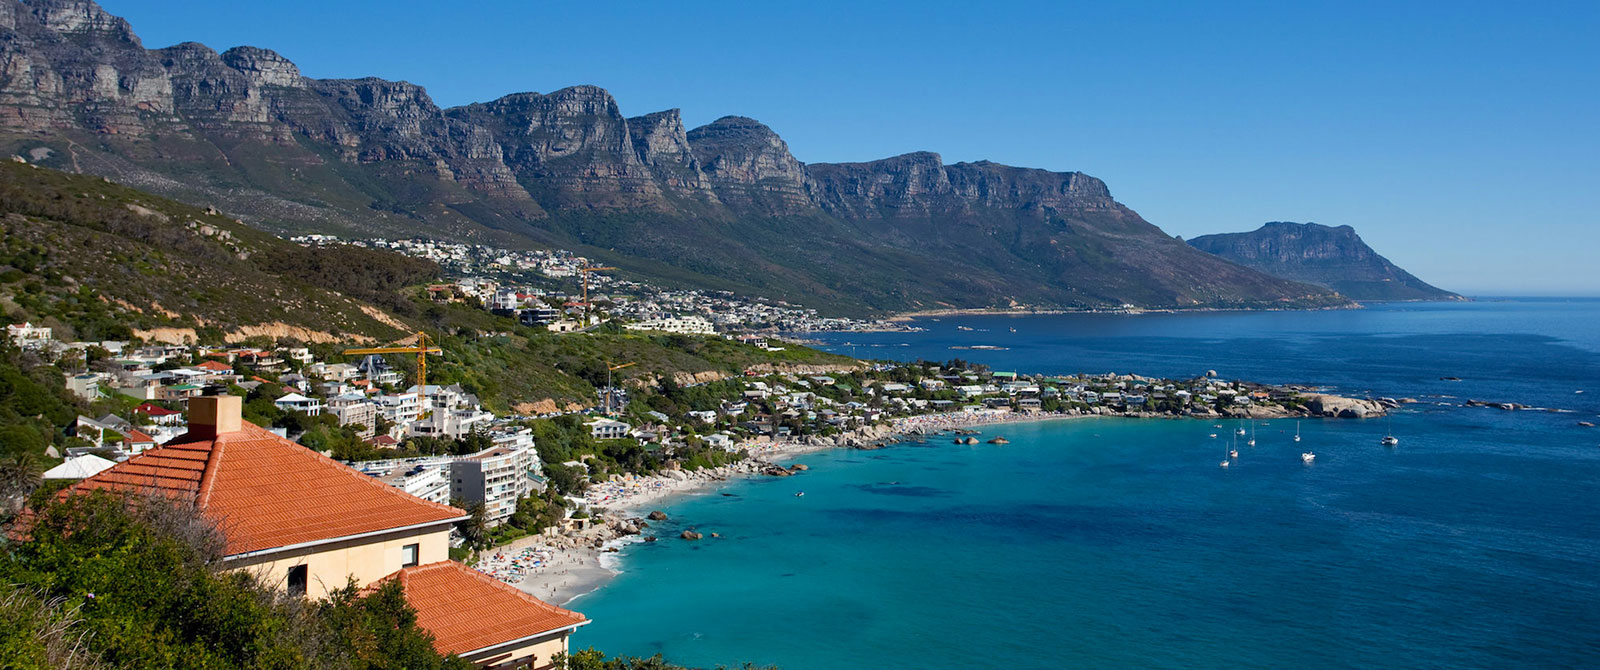 Clifton Beaches and the Twelve Apostles in Cape Town, South Africa